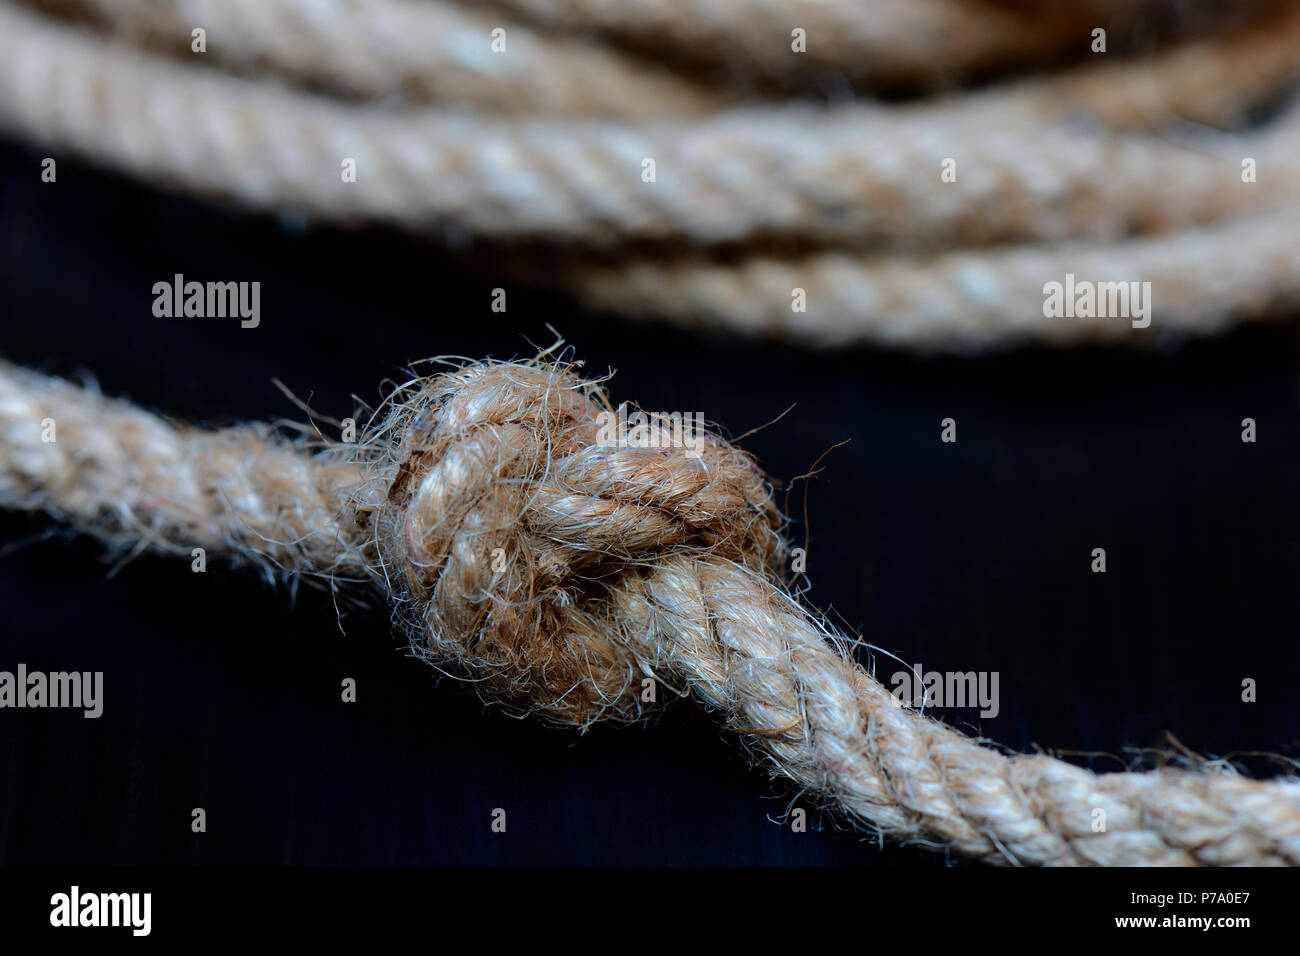 knot in jute rope Stock Photo